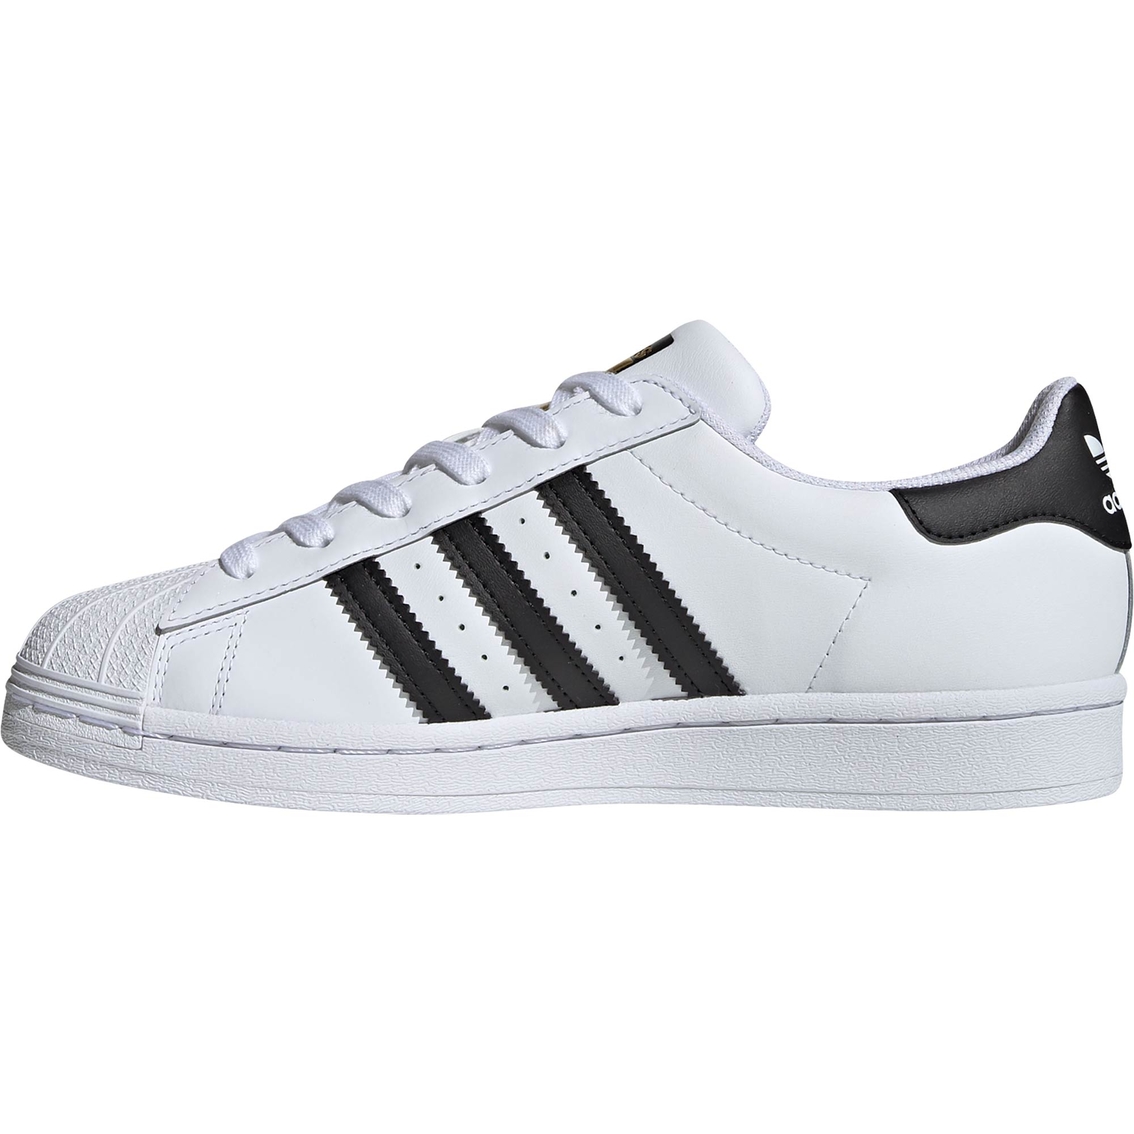 Adidas Women's Superstar Shoes | Sneakers | Shoes | Shop The Exchange